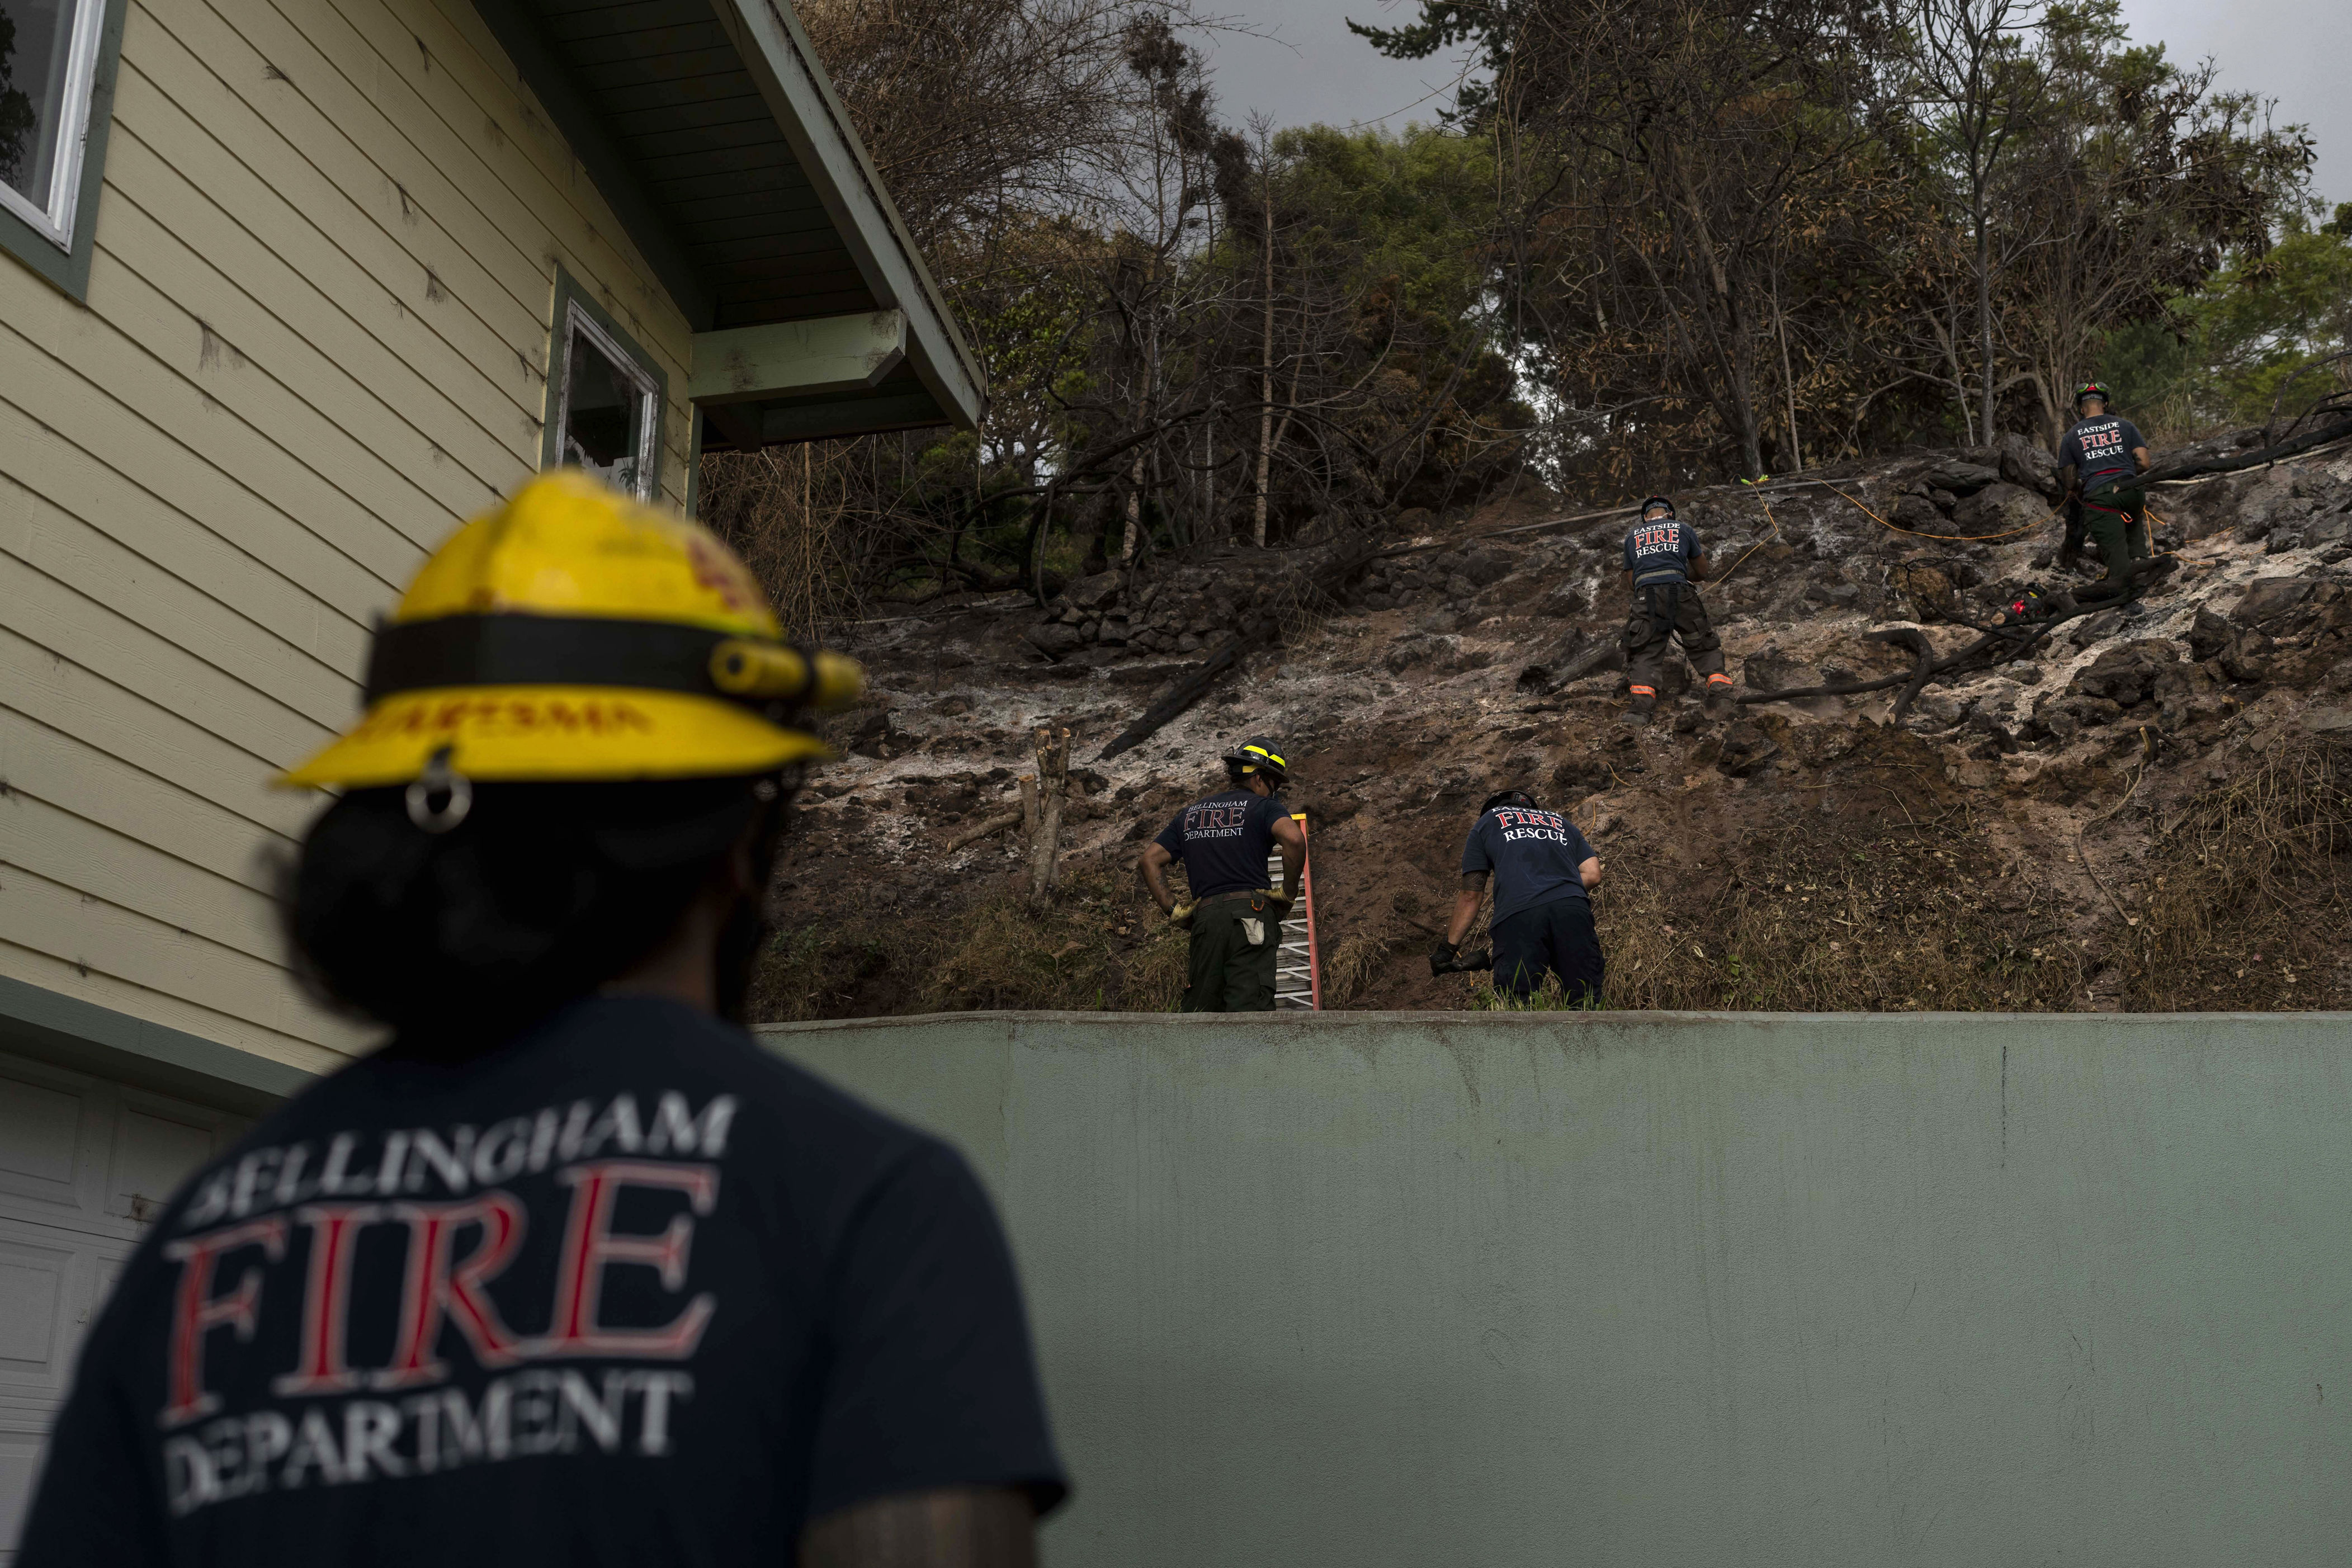 maui fire department report on deadly wildfire details need for more equipment and mutual aid plans